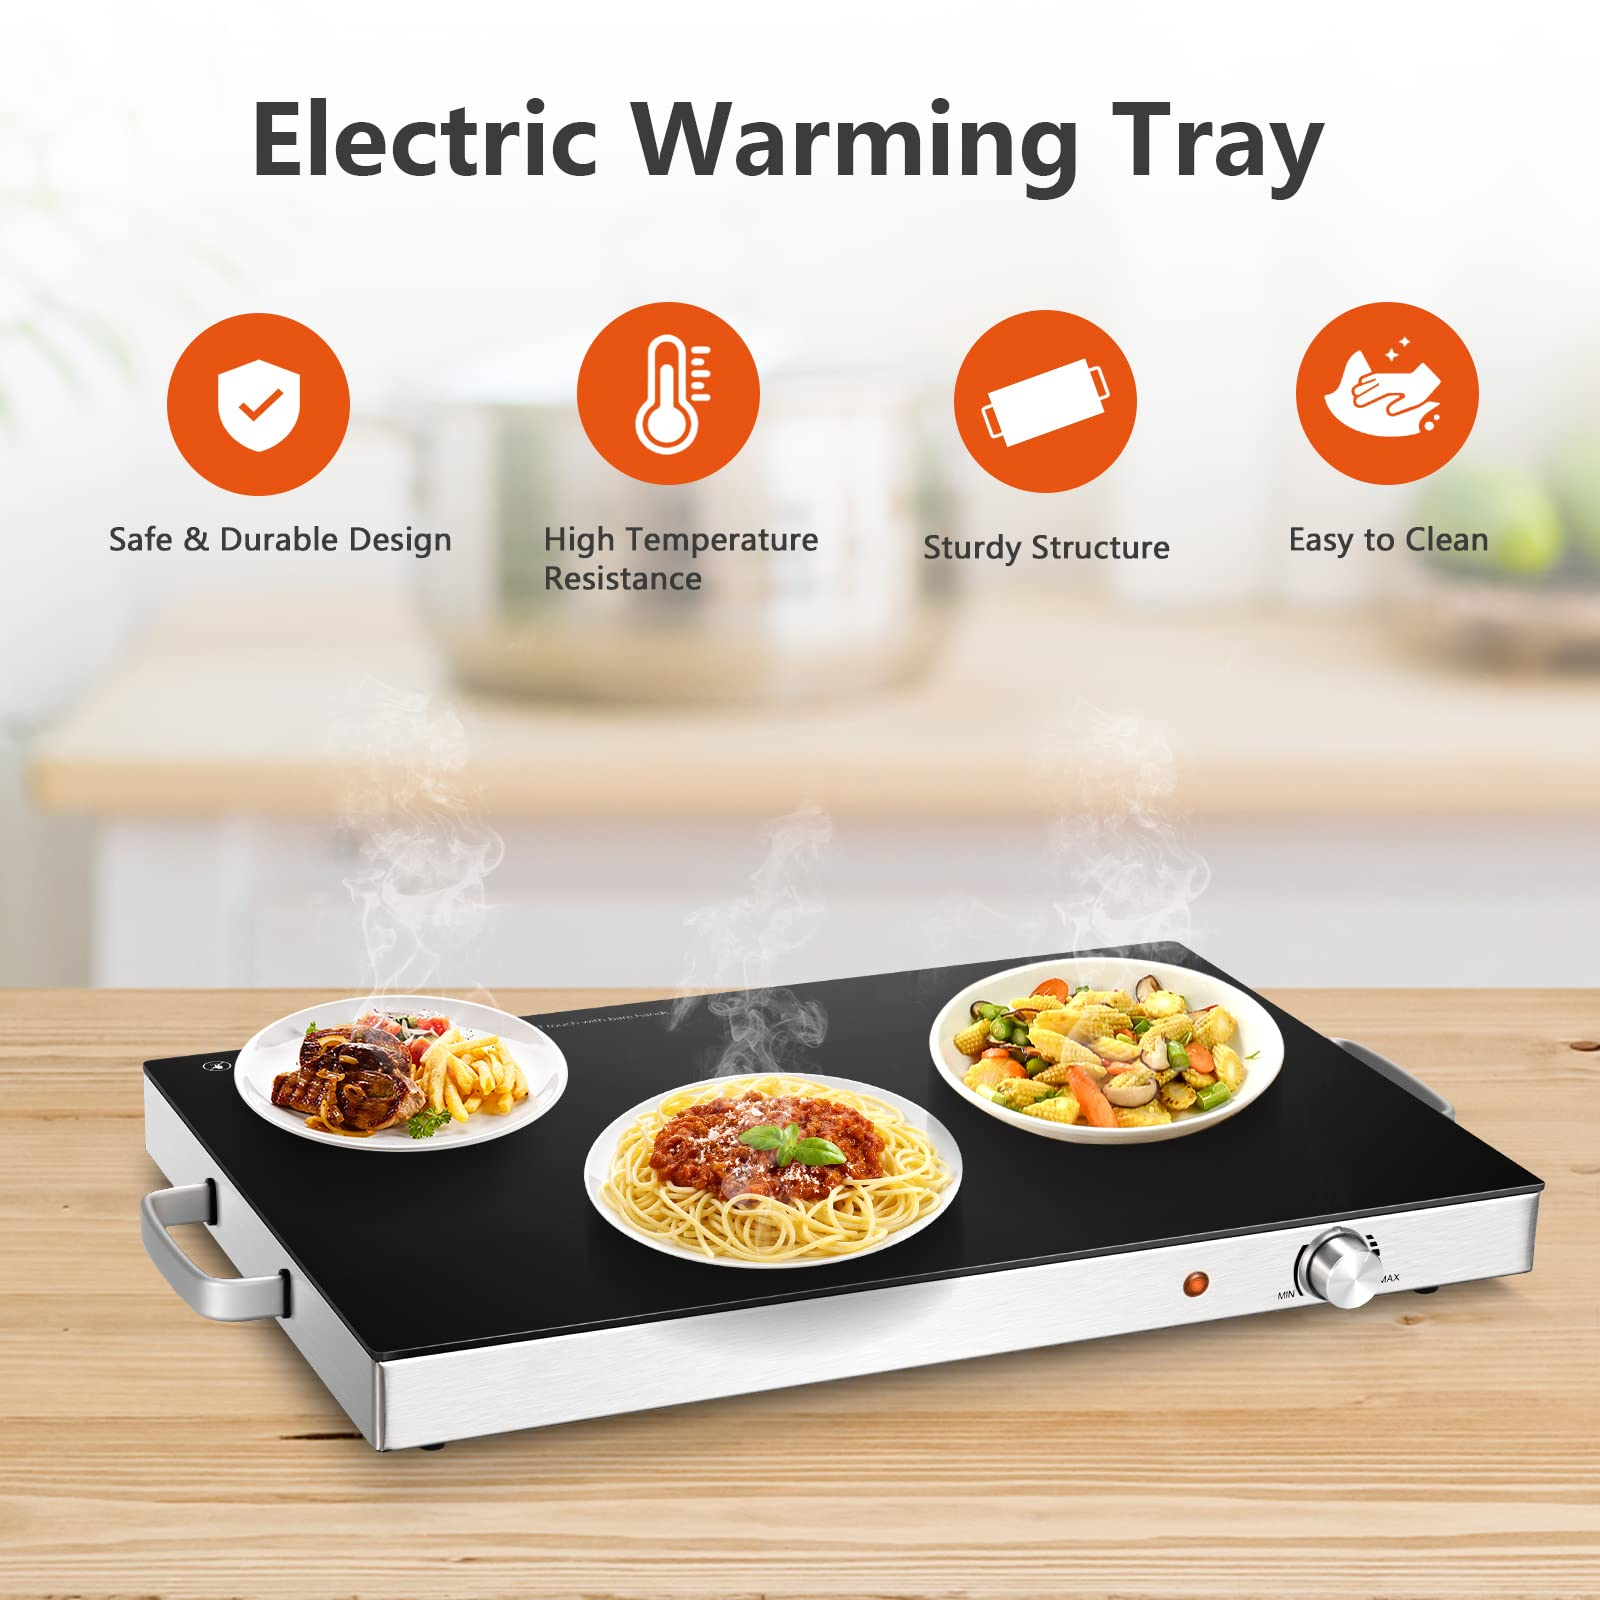 Giantex 2 Packs Electric Warming Tray, 22''x15'' Hot Plate with Adjustable Temperature Control